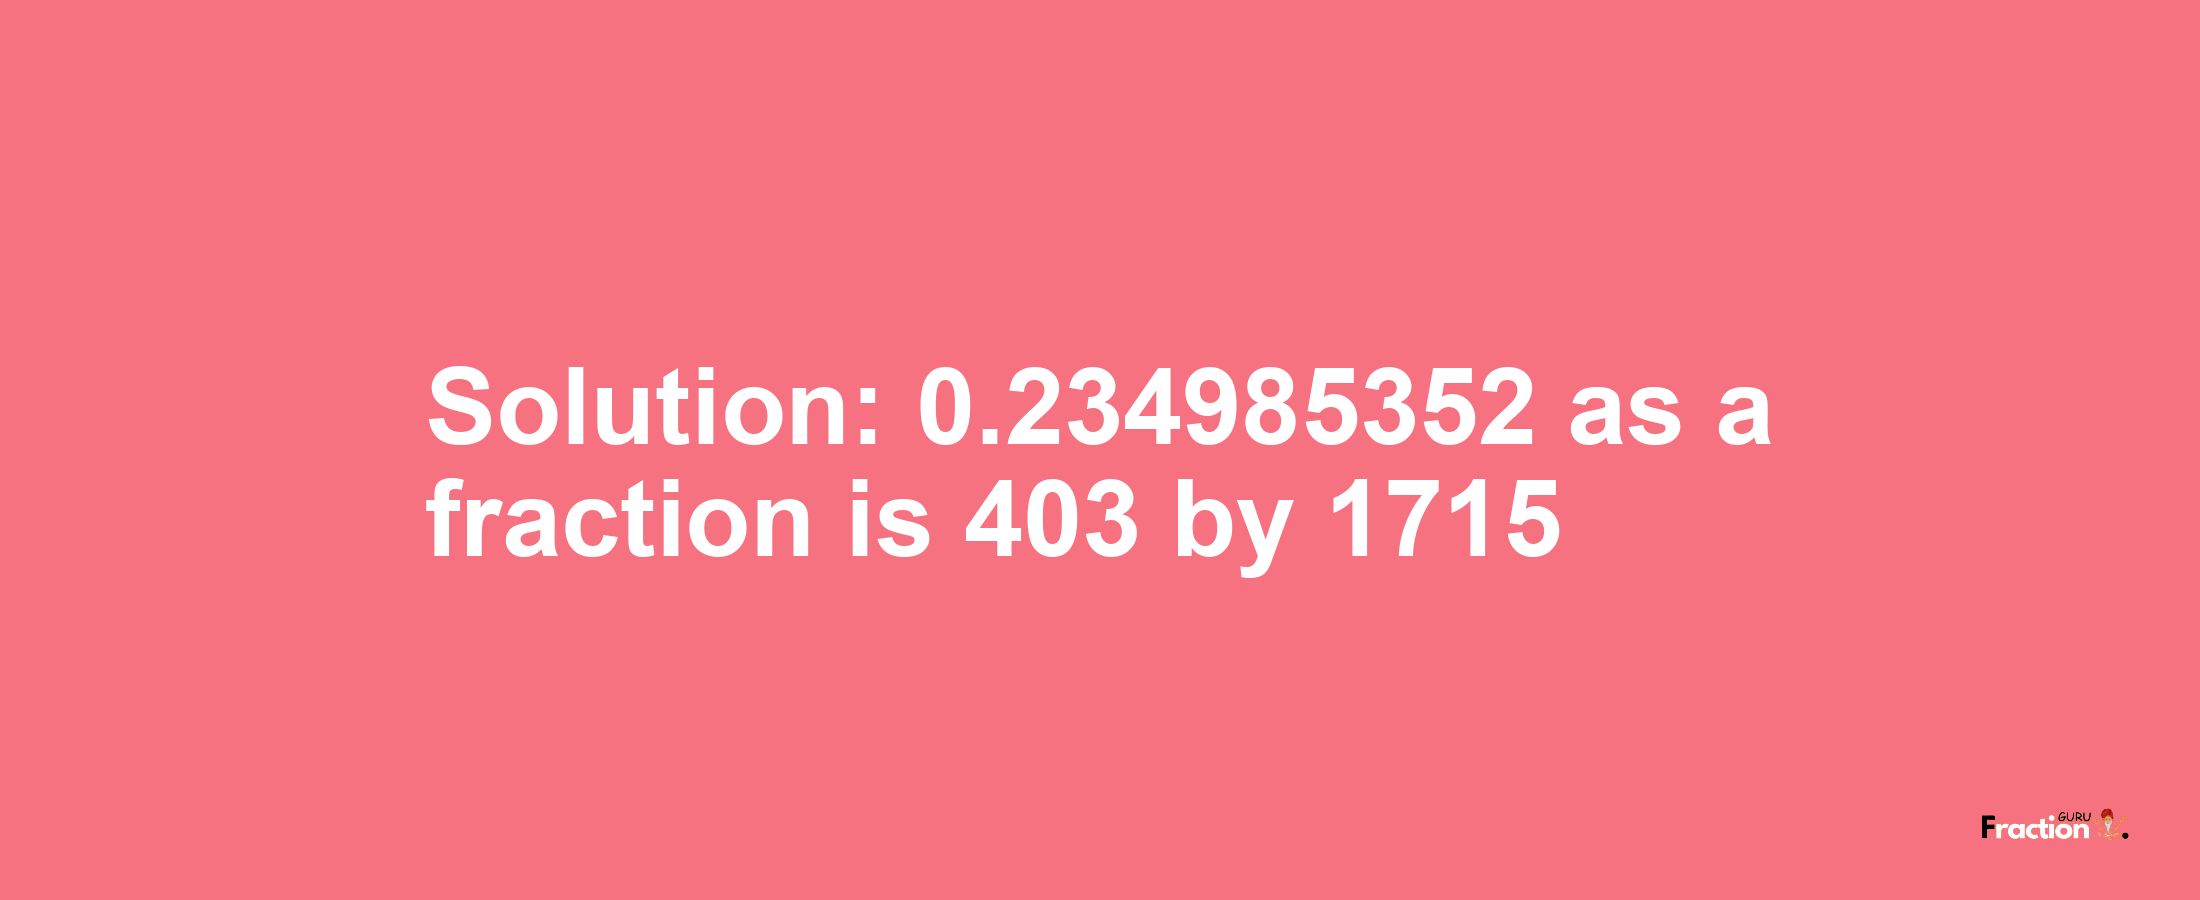 Solution:0.234985352 as a fraction is 403/1715